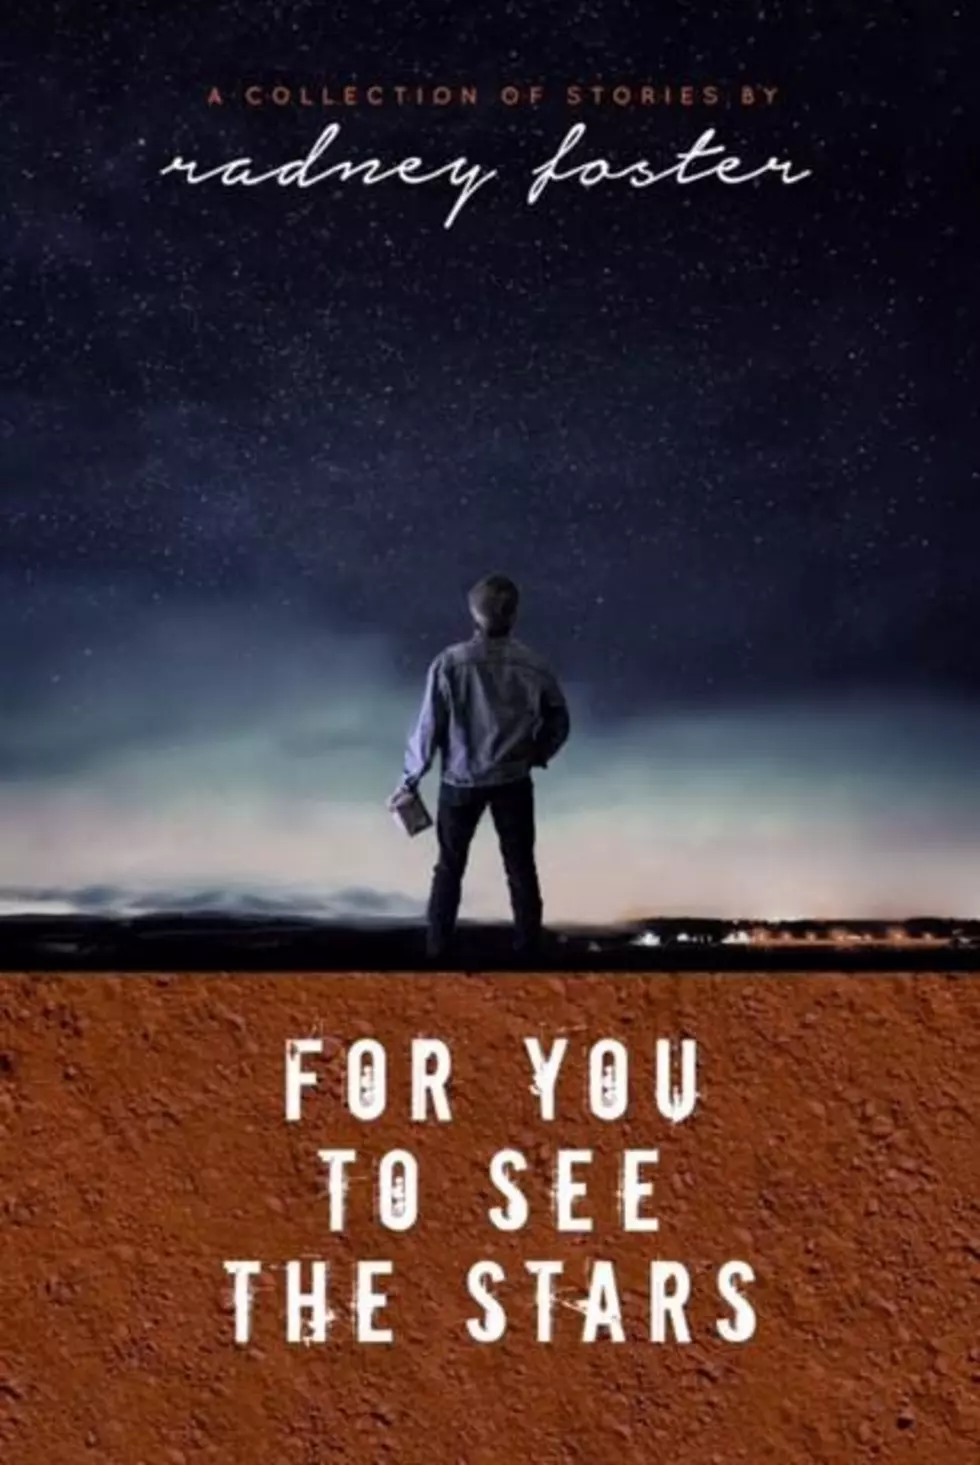 Radney Foster Announces CD/Book Combo &#8216;For You To See the Stars&#8217;